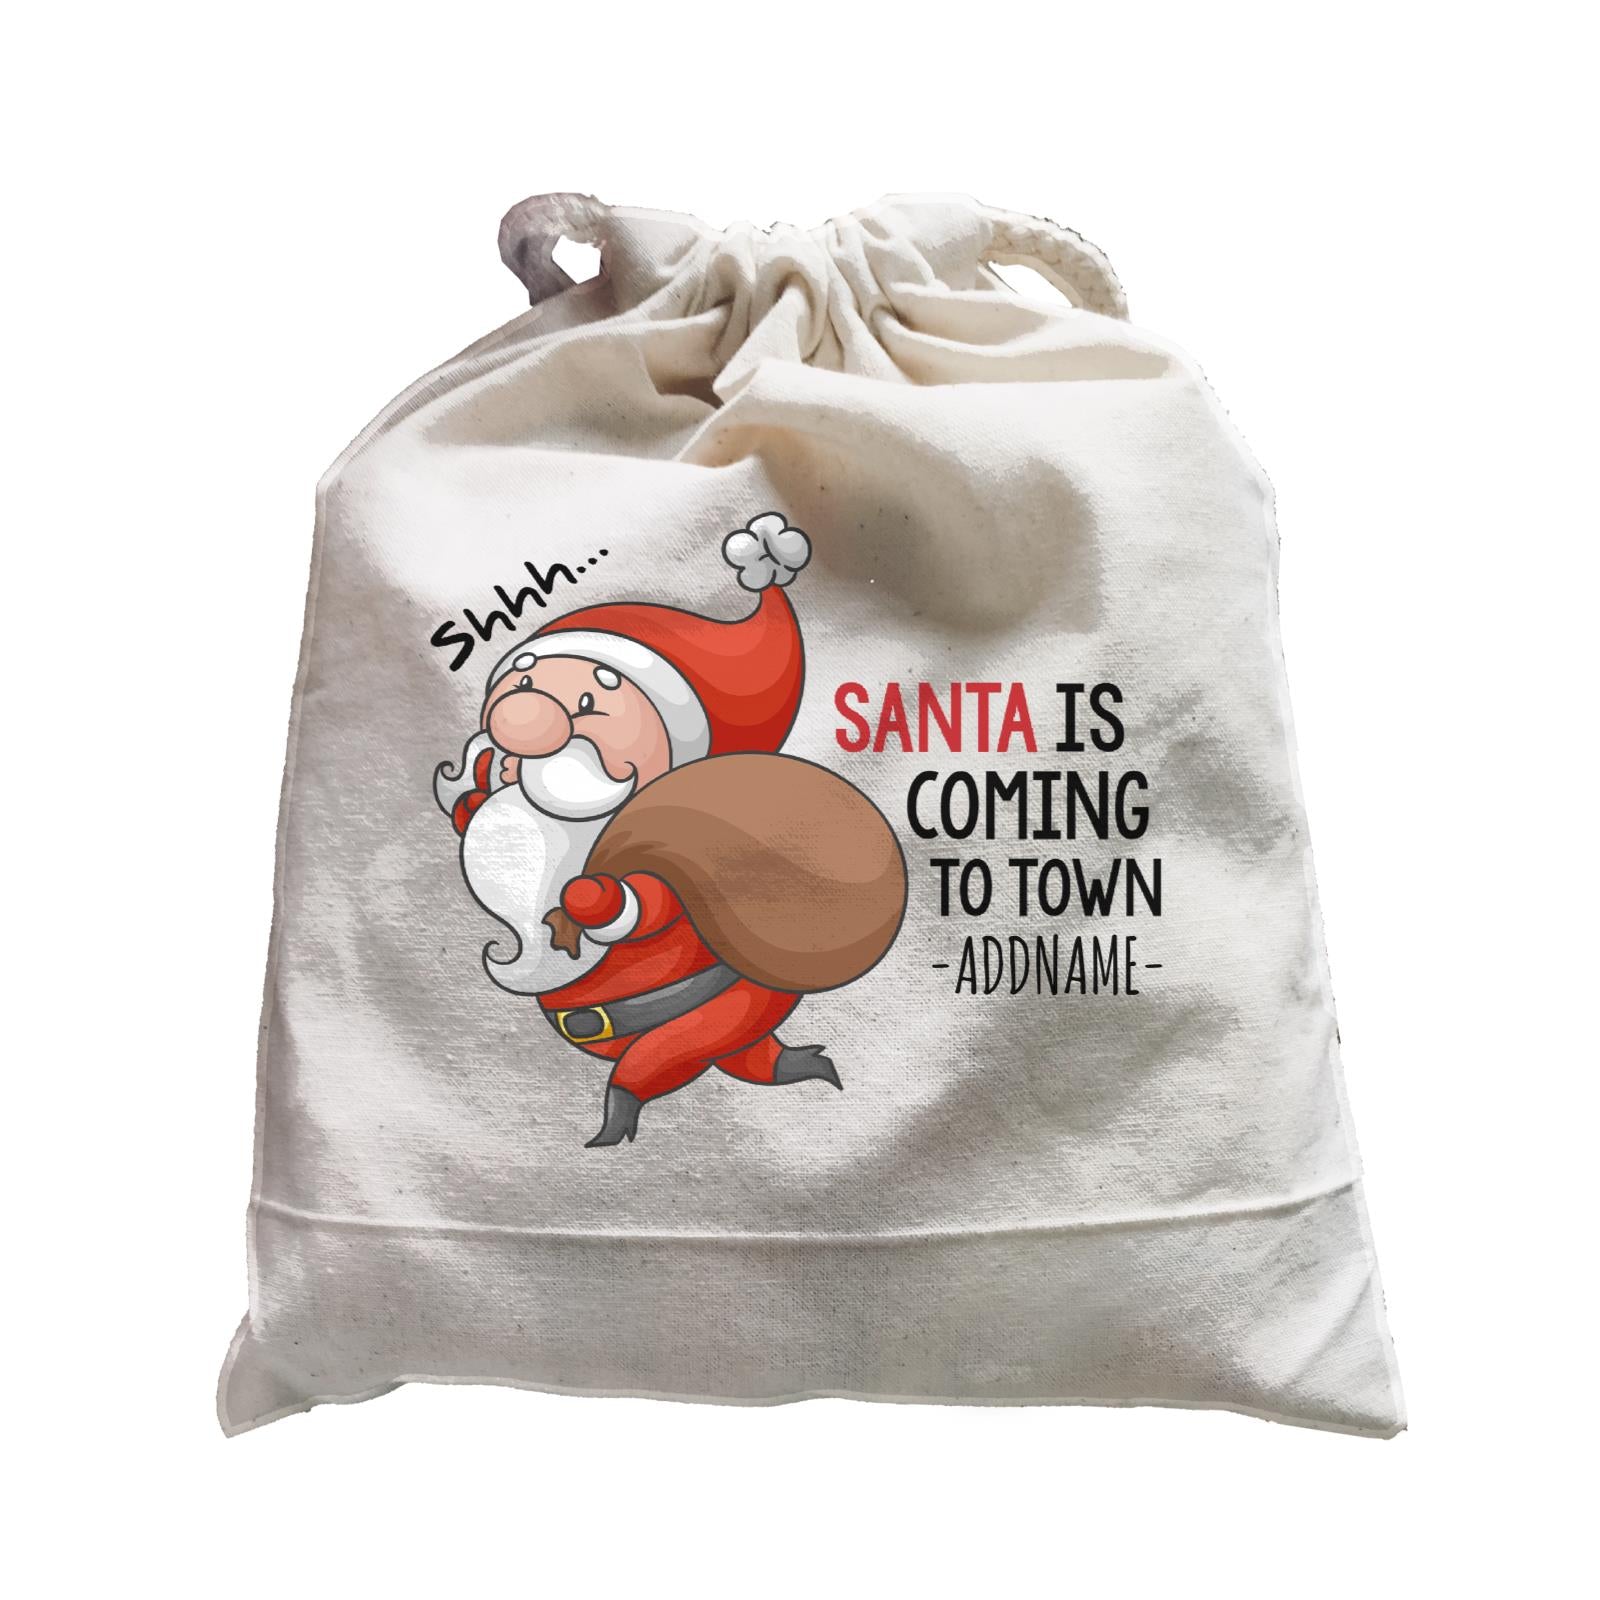 Santa Is Coming To Town Accessories Satchel